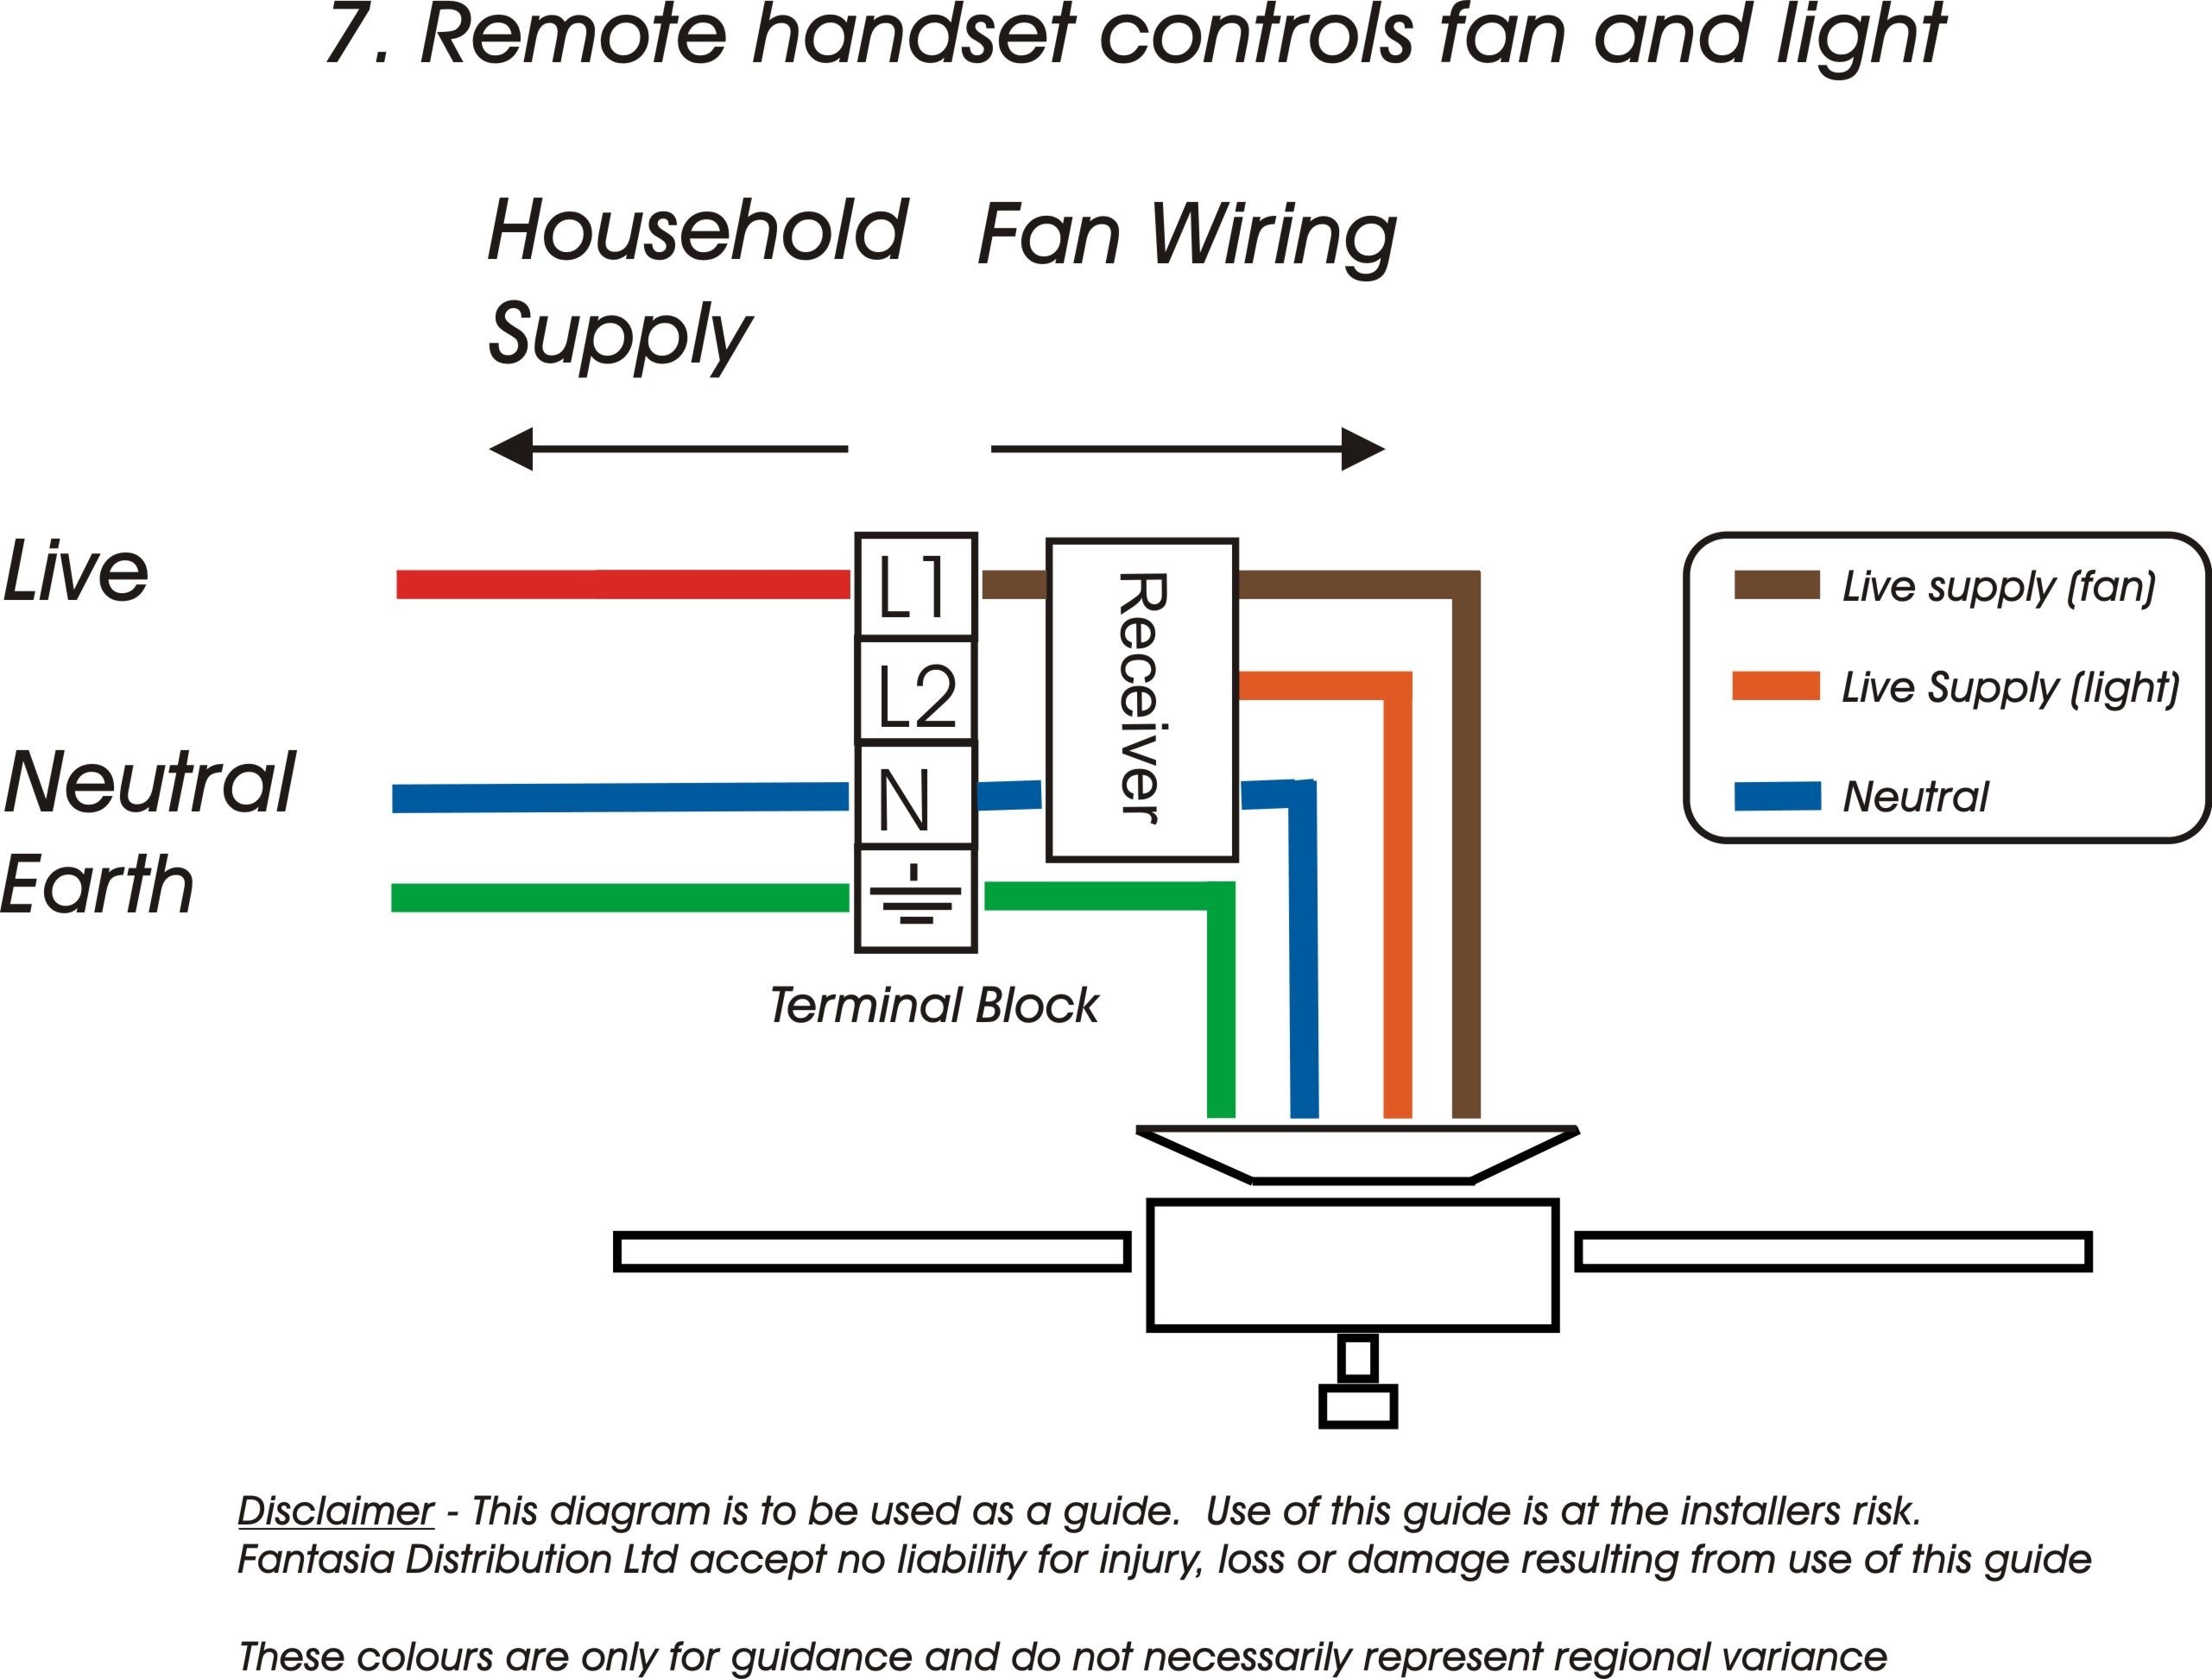 Mesmerizing Unique Red Luxury Ceiling Fan Throughout Harbor Breeze 3 Speed Switch Wiring Diagram Ideas 4 Wire